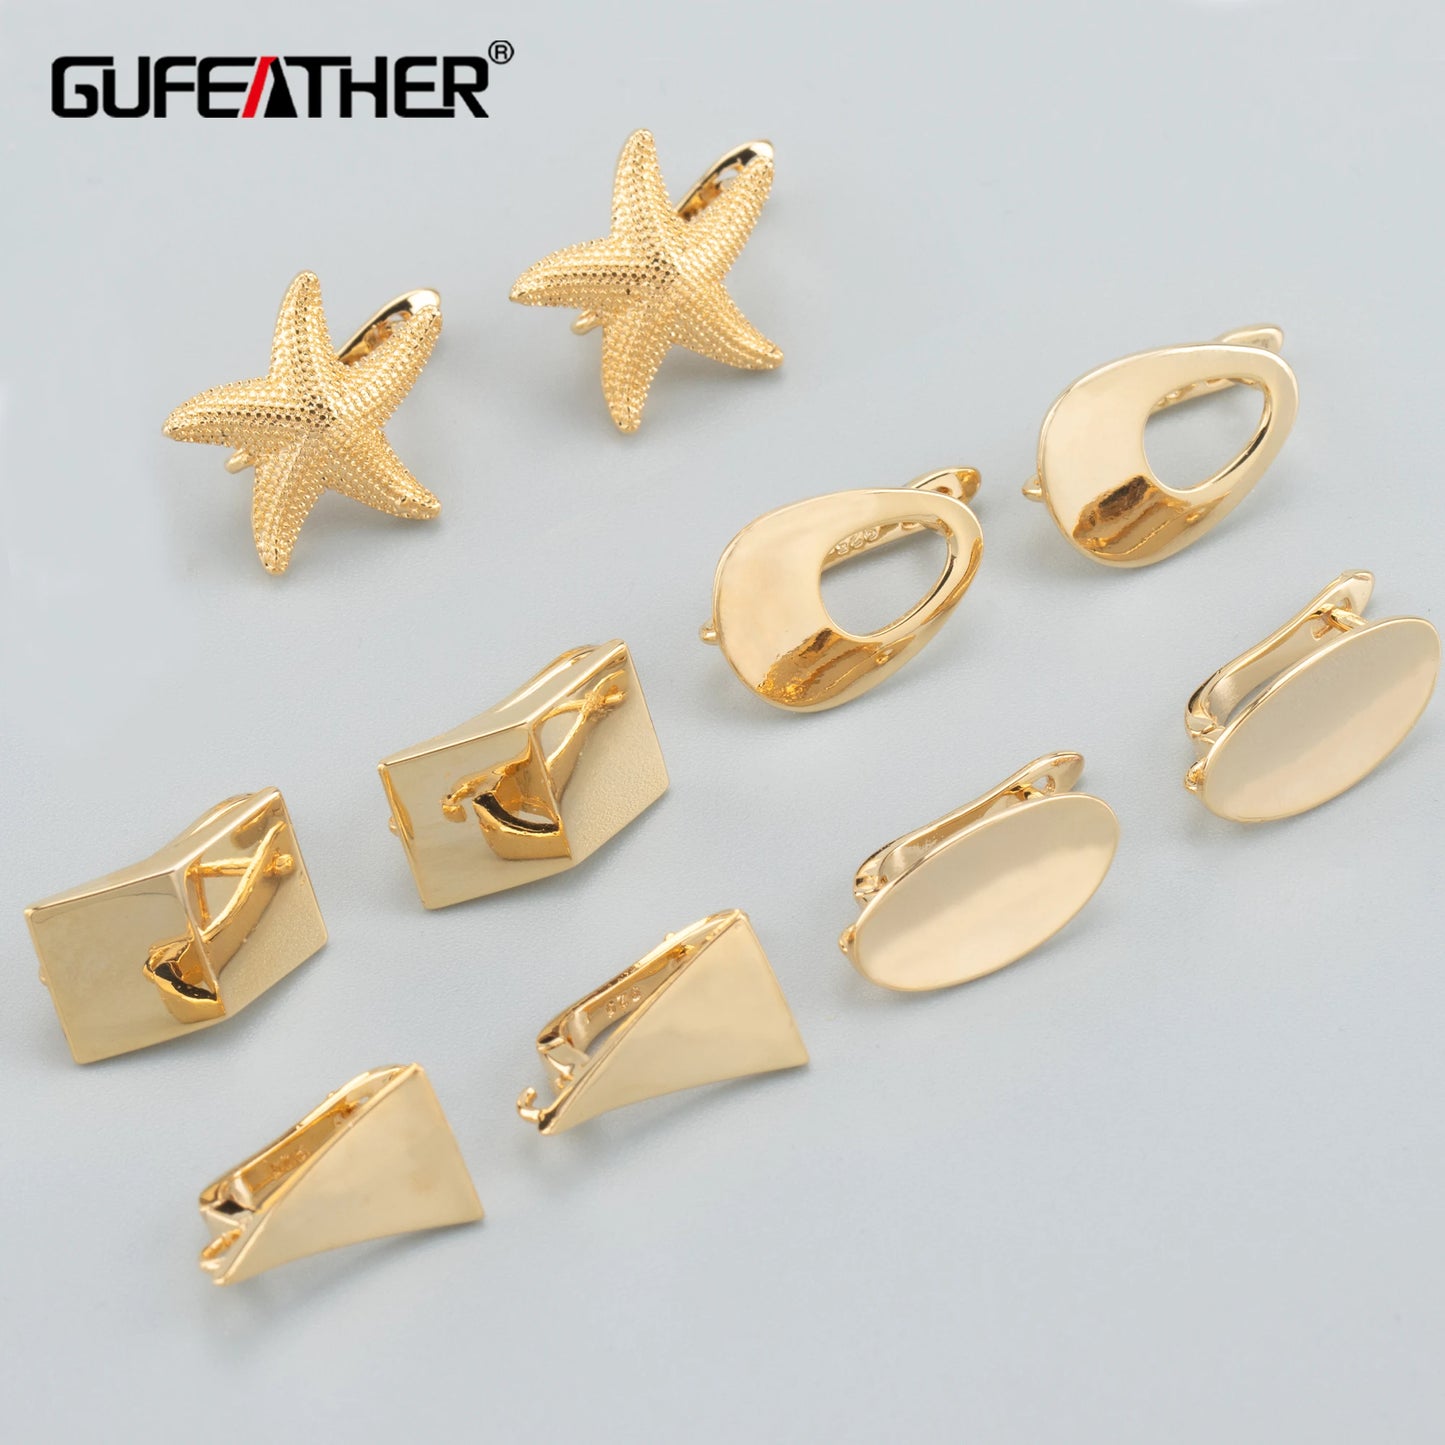 GUFEATHER M804,jewelry accessories,pass REACH,nickel free,18k gold plated,charms,jewelry making,ear clip,diy earrings,10pcs/lot